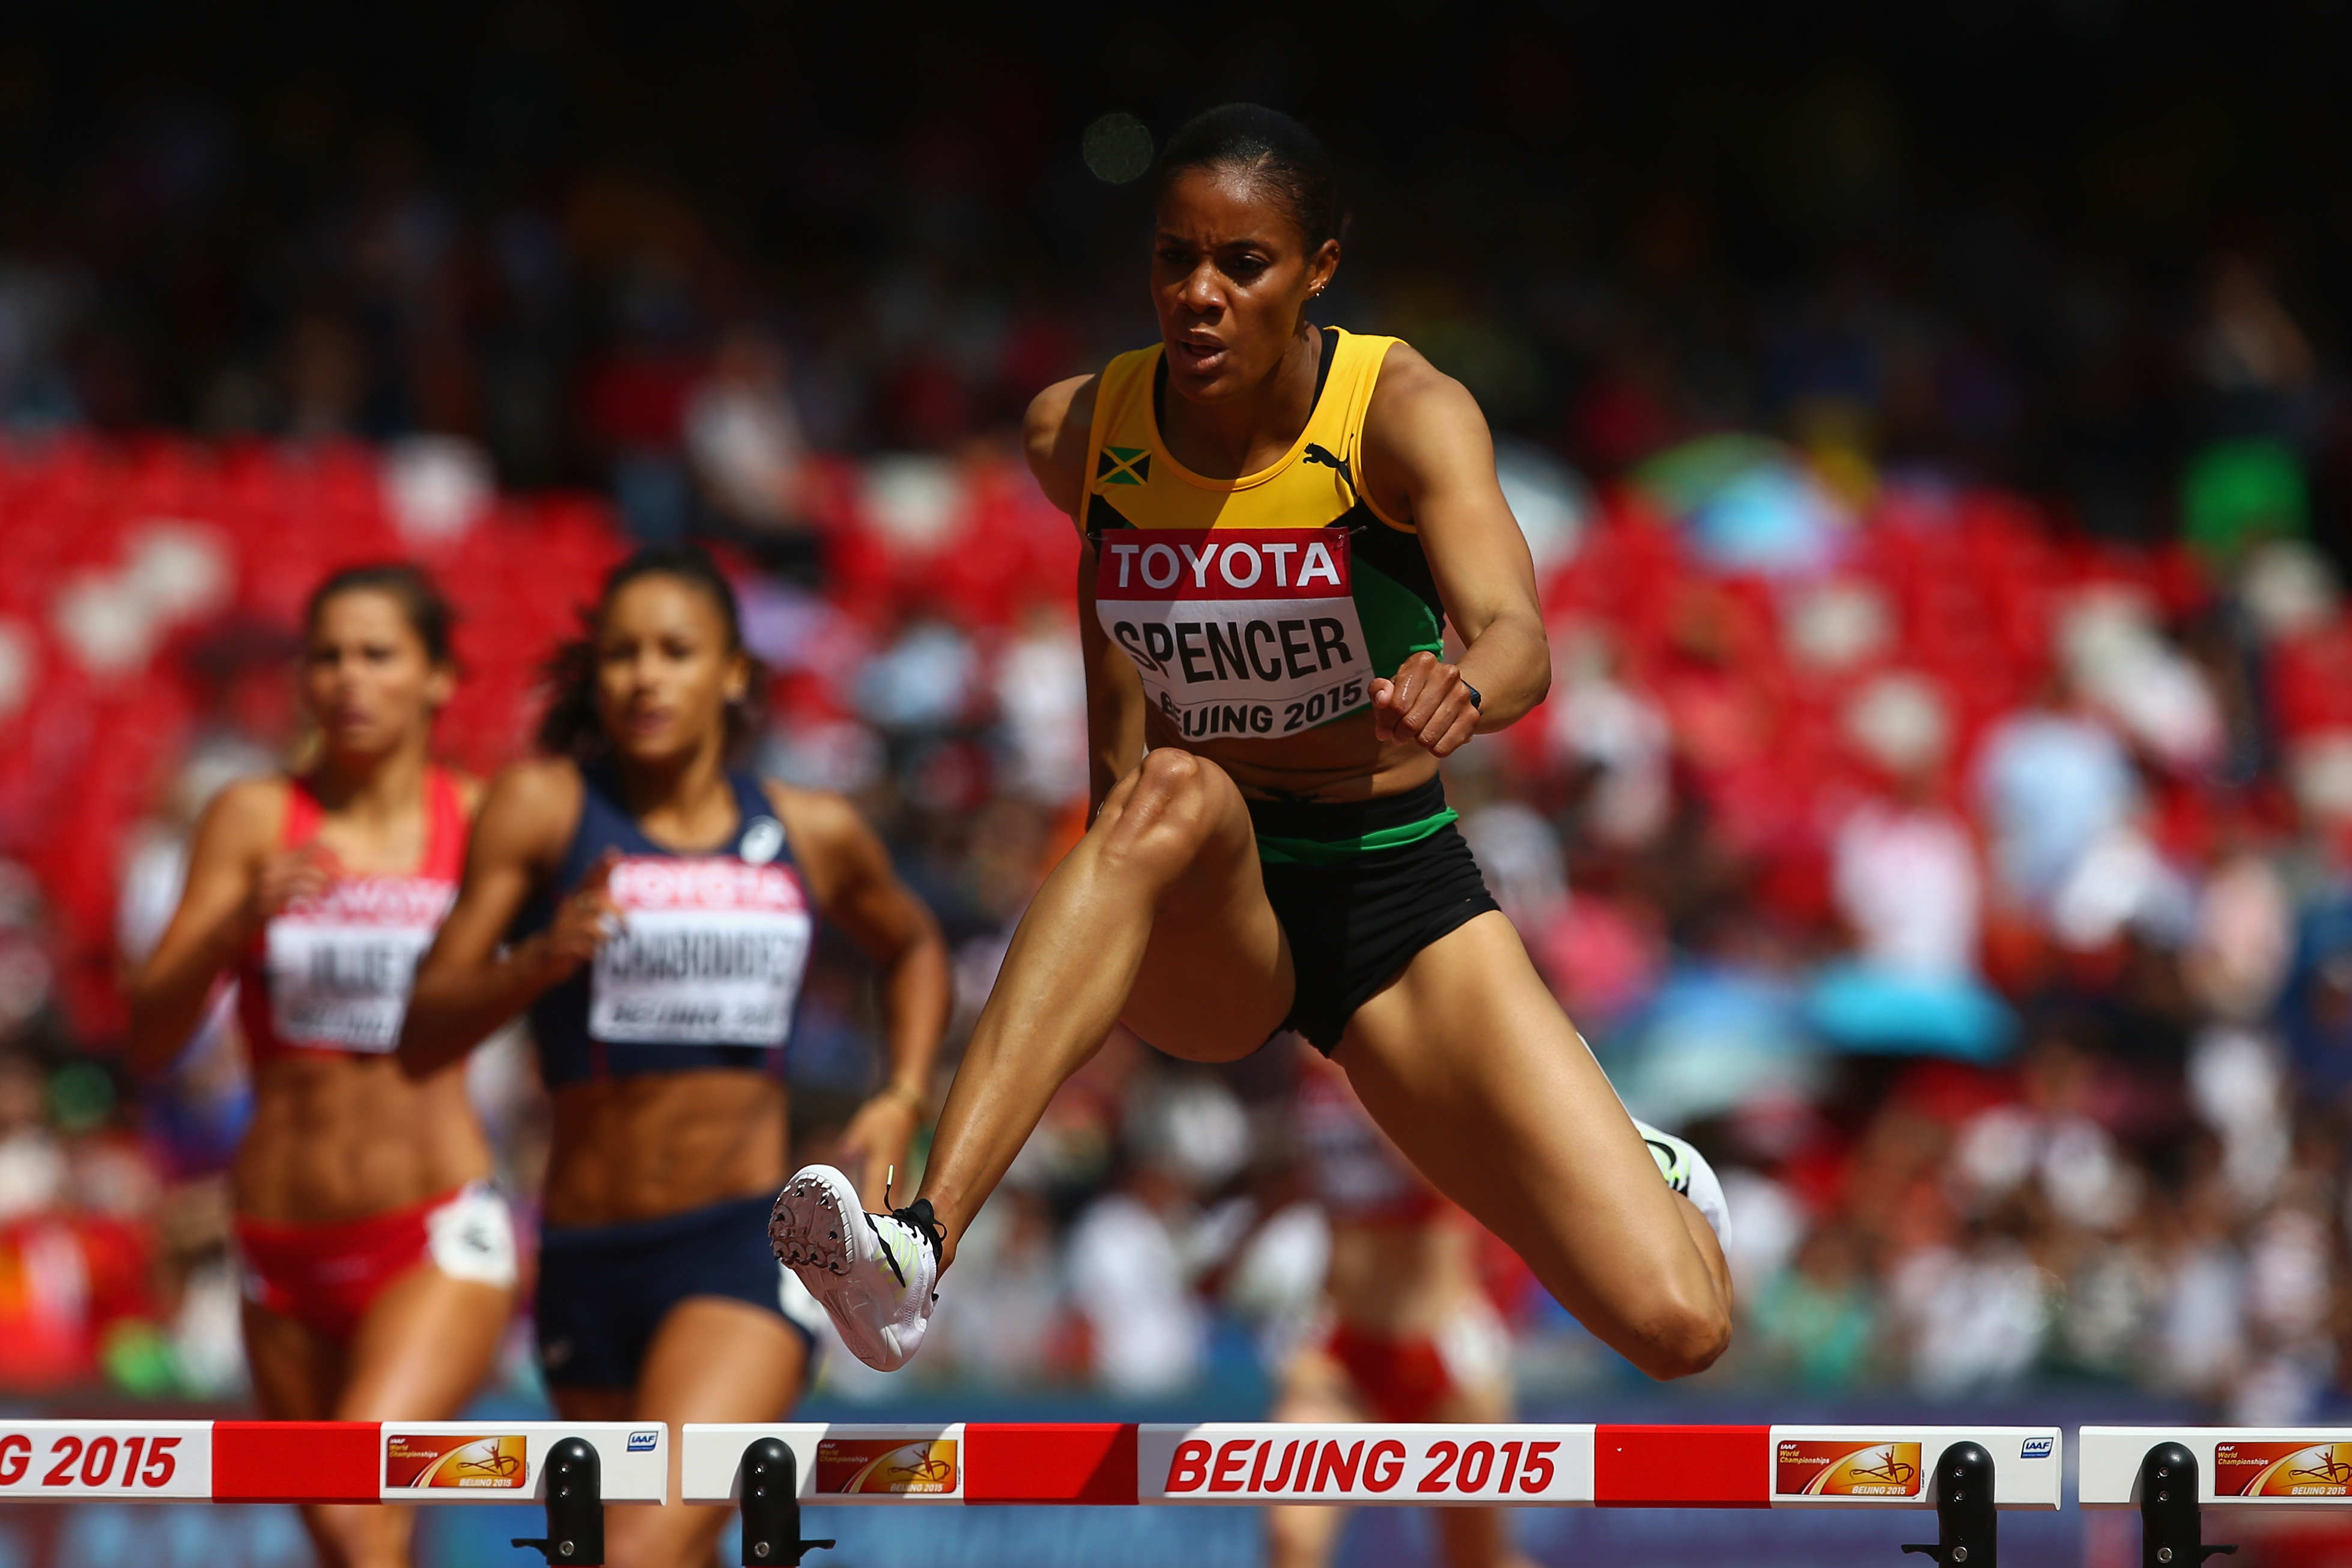 Jamaican athlete Kaliese Spencer to receive first major global medal after Russian's doping ban